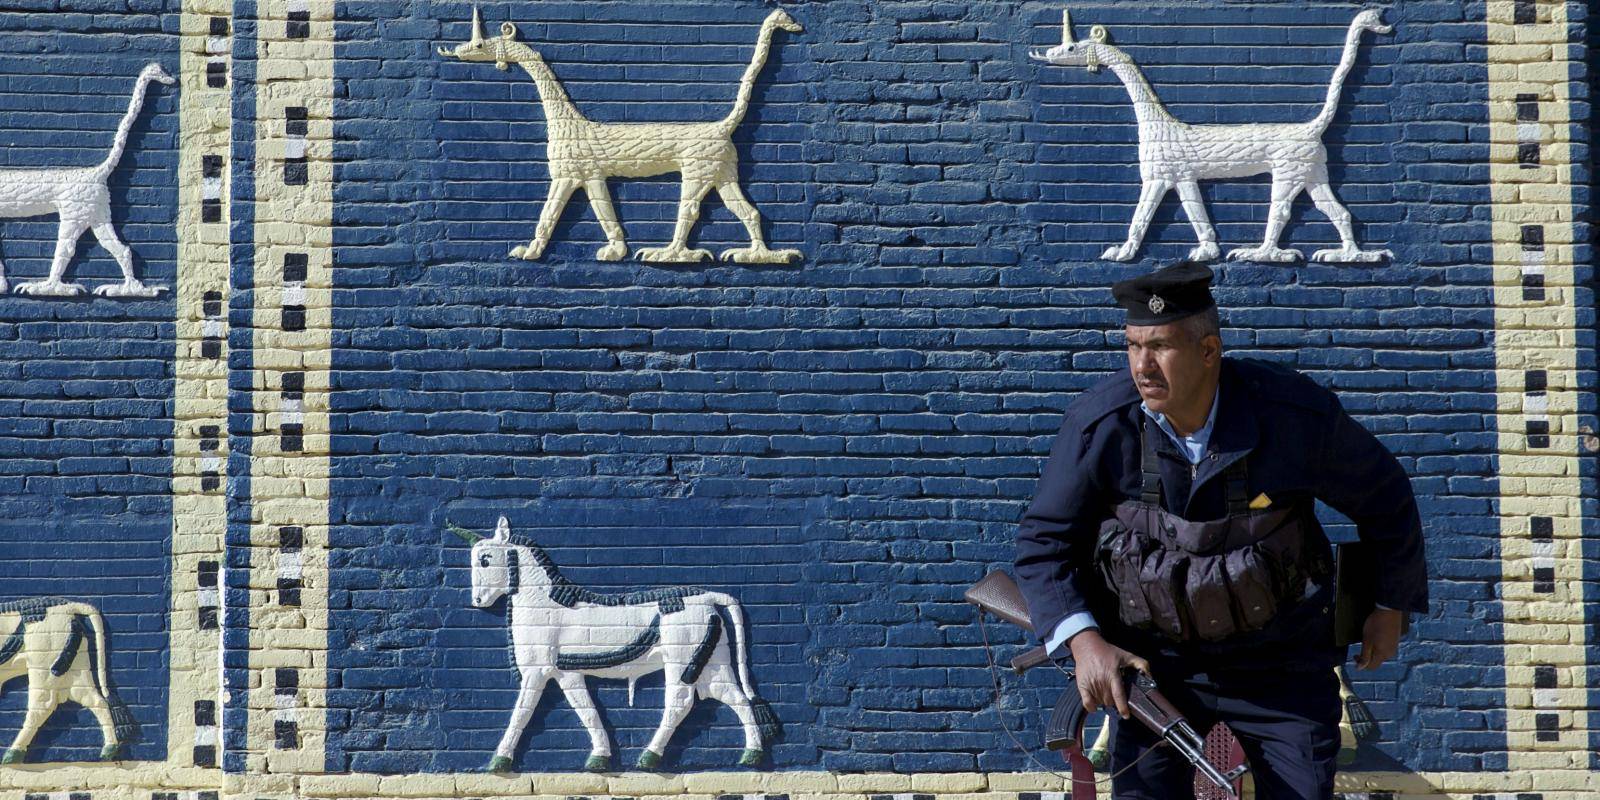 A guard in front of a replica of the Ishtar Gate at the ancient city of Babylon, Iraq, on 20 December 2016.